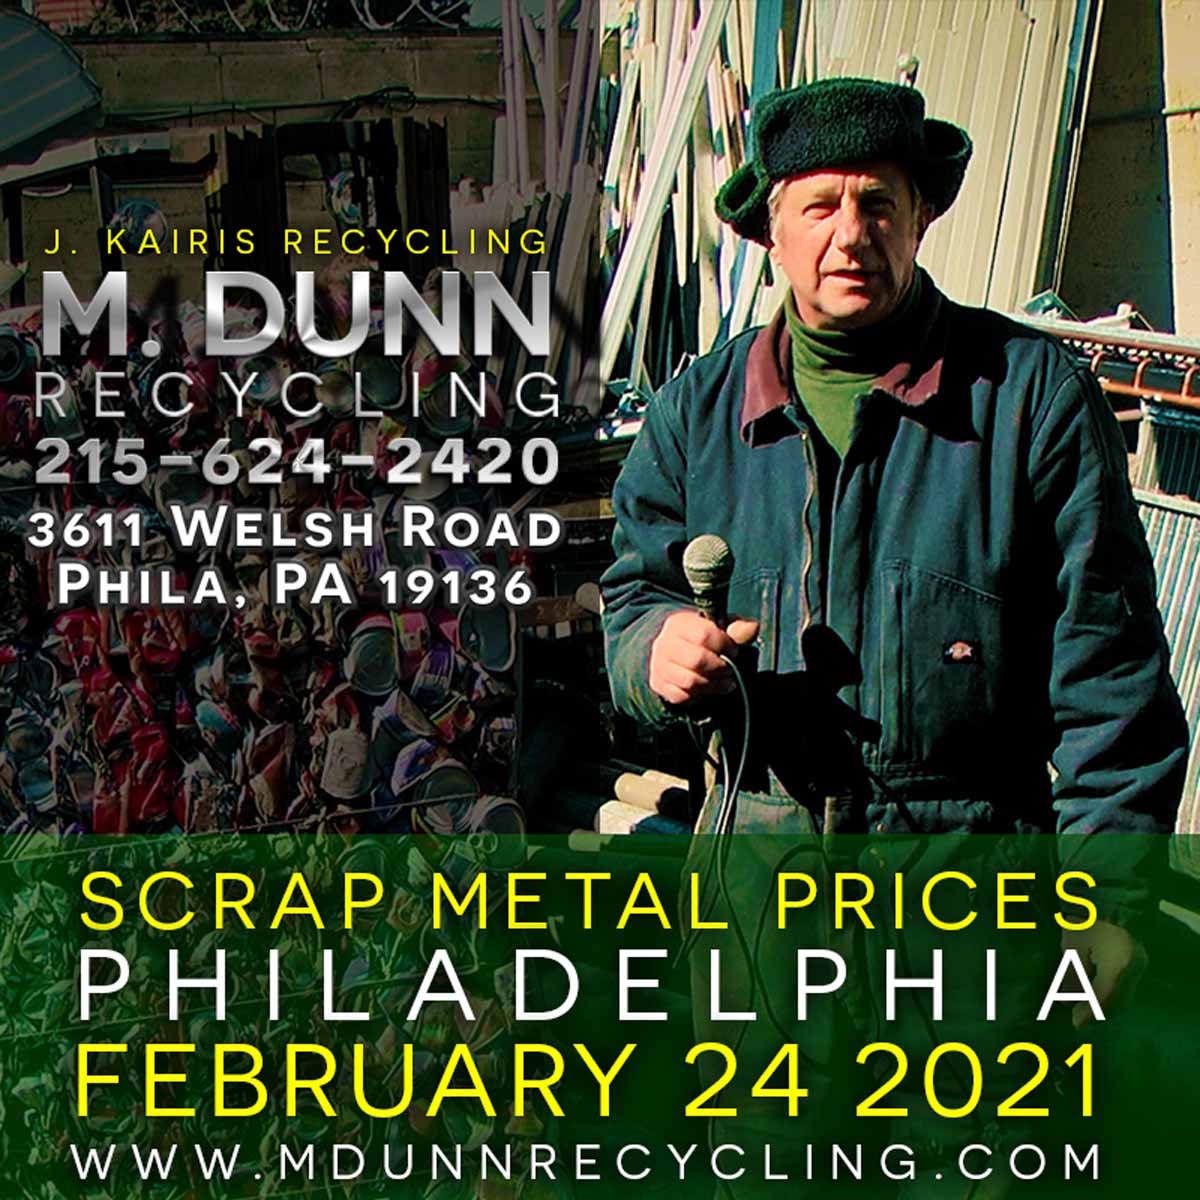 Philadelphia Scrap Metal Prices Blog for March 11th, 2021. Port Richmond 19134 Fishtown 19025 Scrap Prices have started to rise. so call 215-624-2420 fir up to date prices. We pay Cash for ALUMINUM CANS AND COPPER. J Karis Recycling formerly M Dunn Recycling Center located at 3611 Welsh Road Philadelphia PA 19136